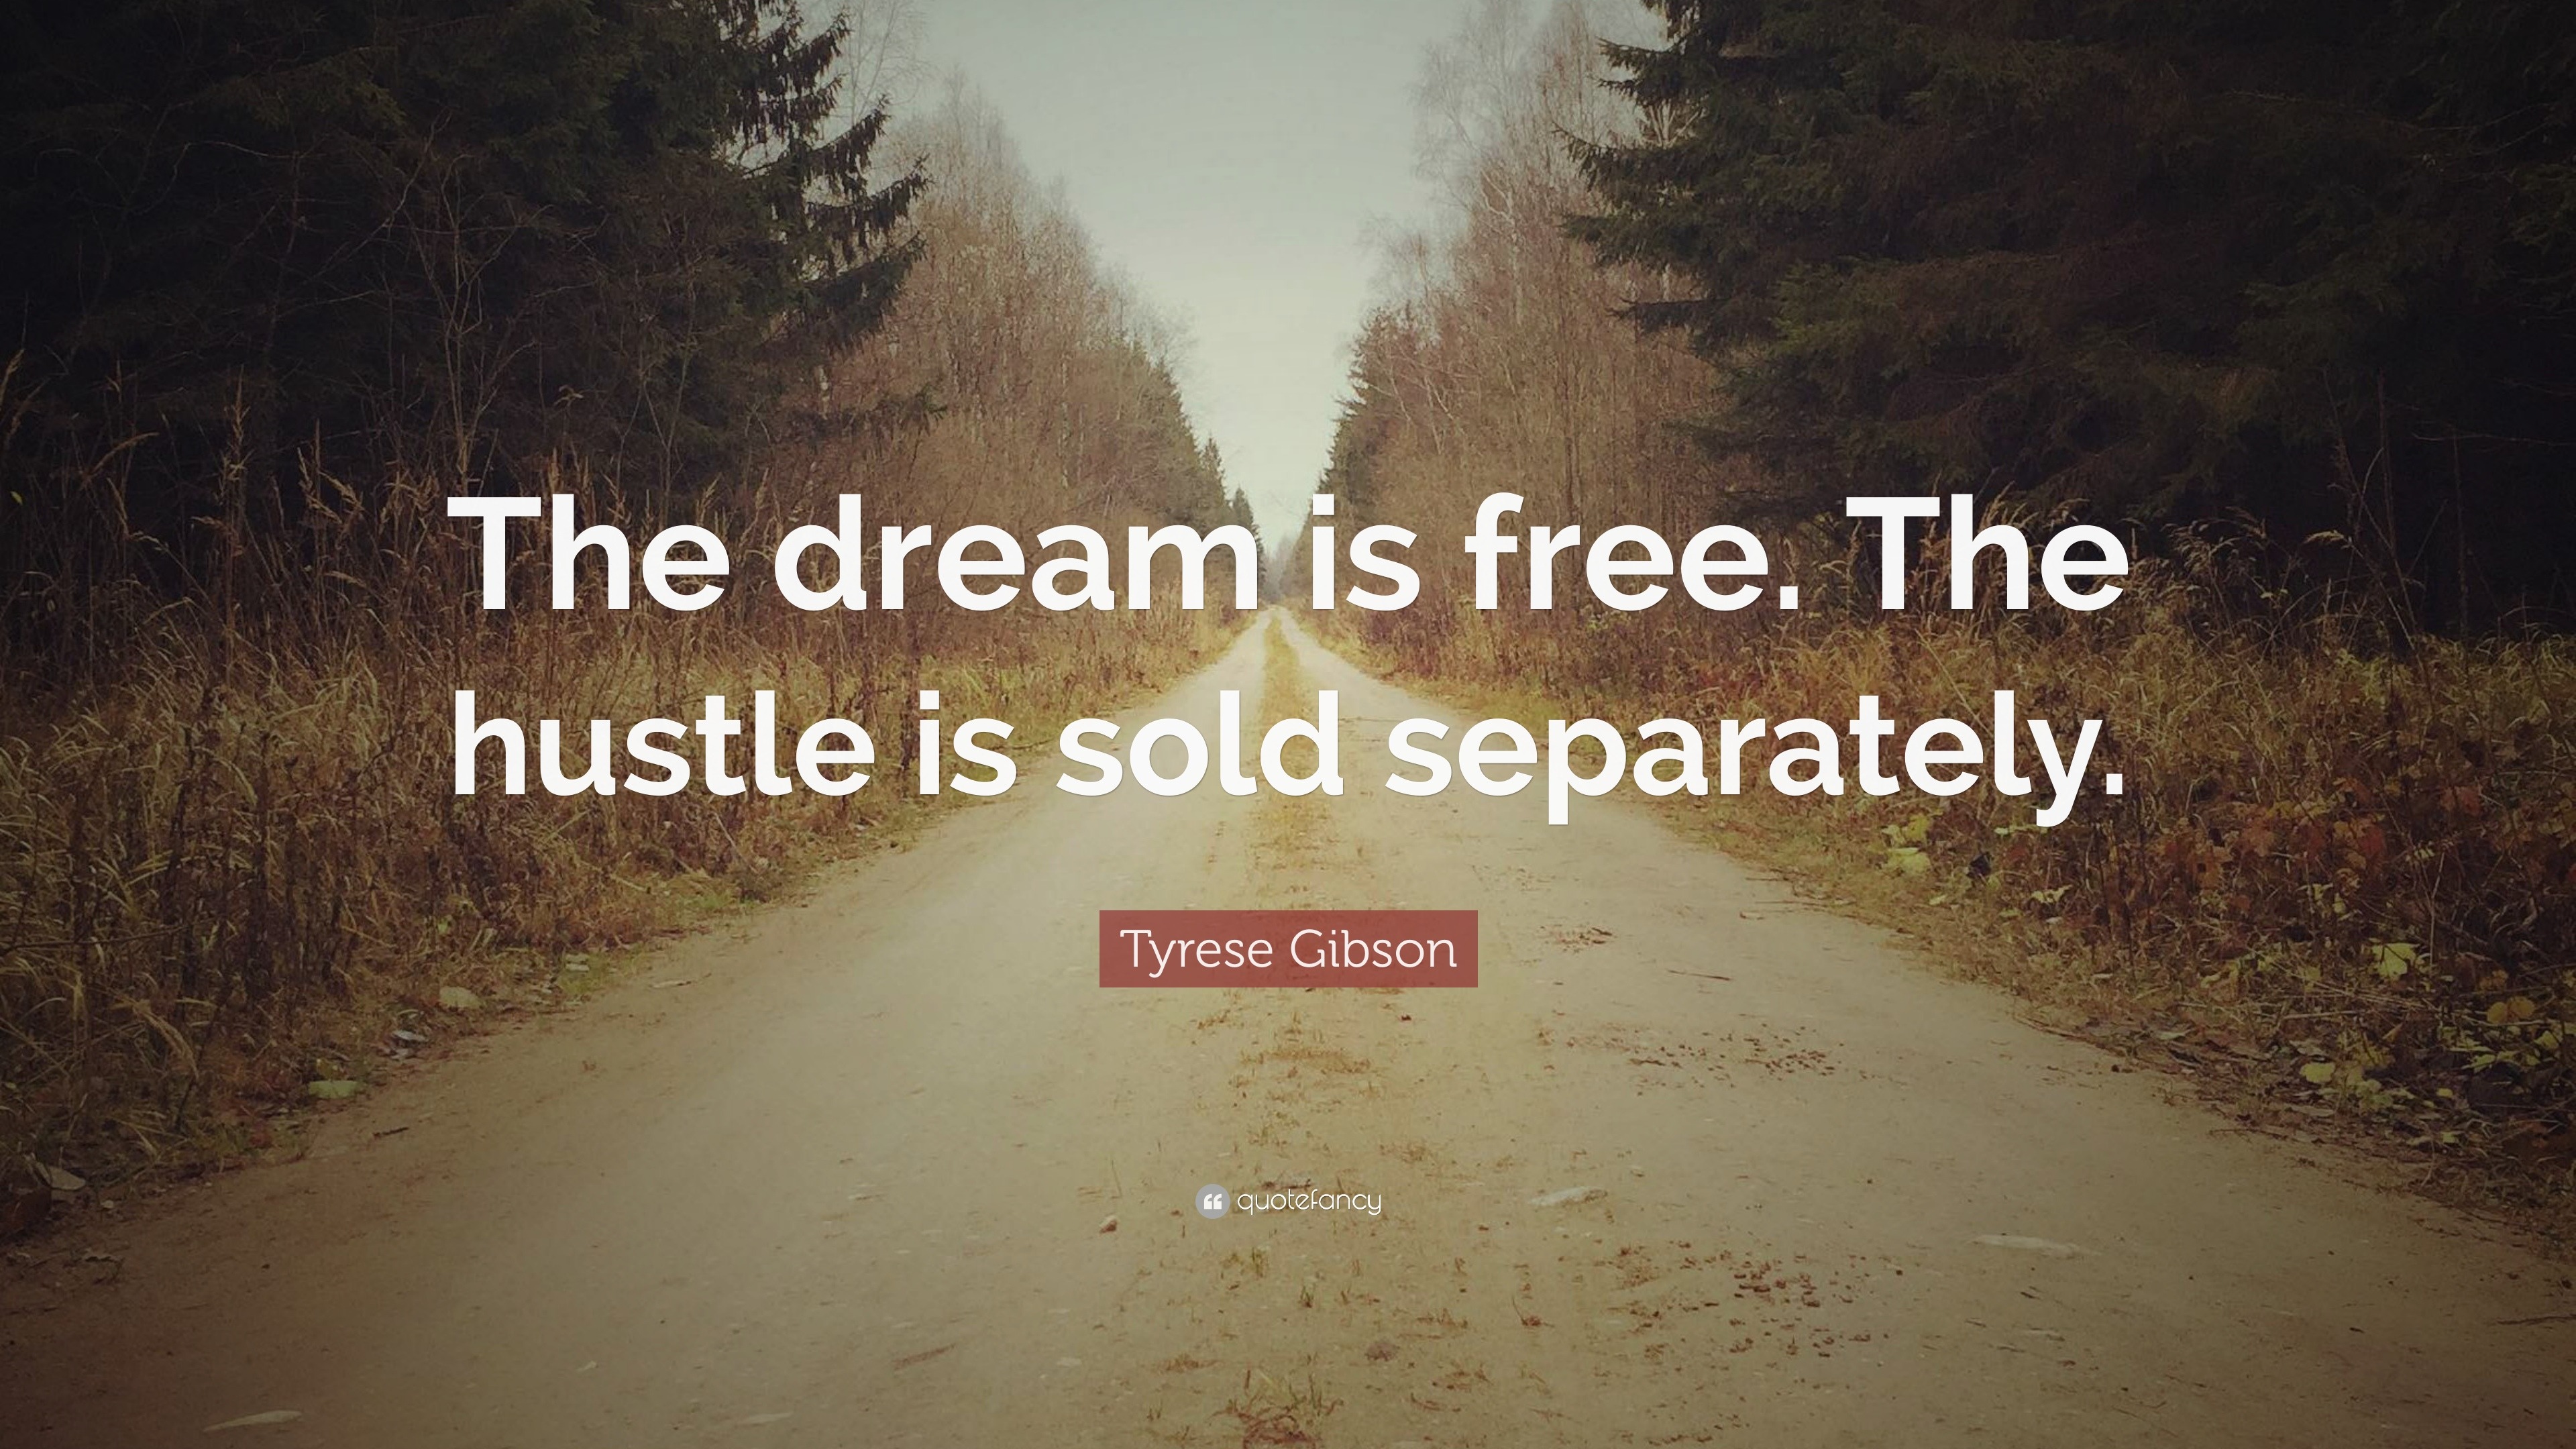 Dream is free hustle is sold separately